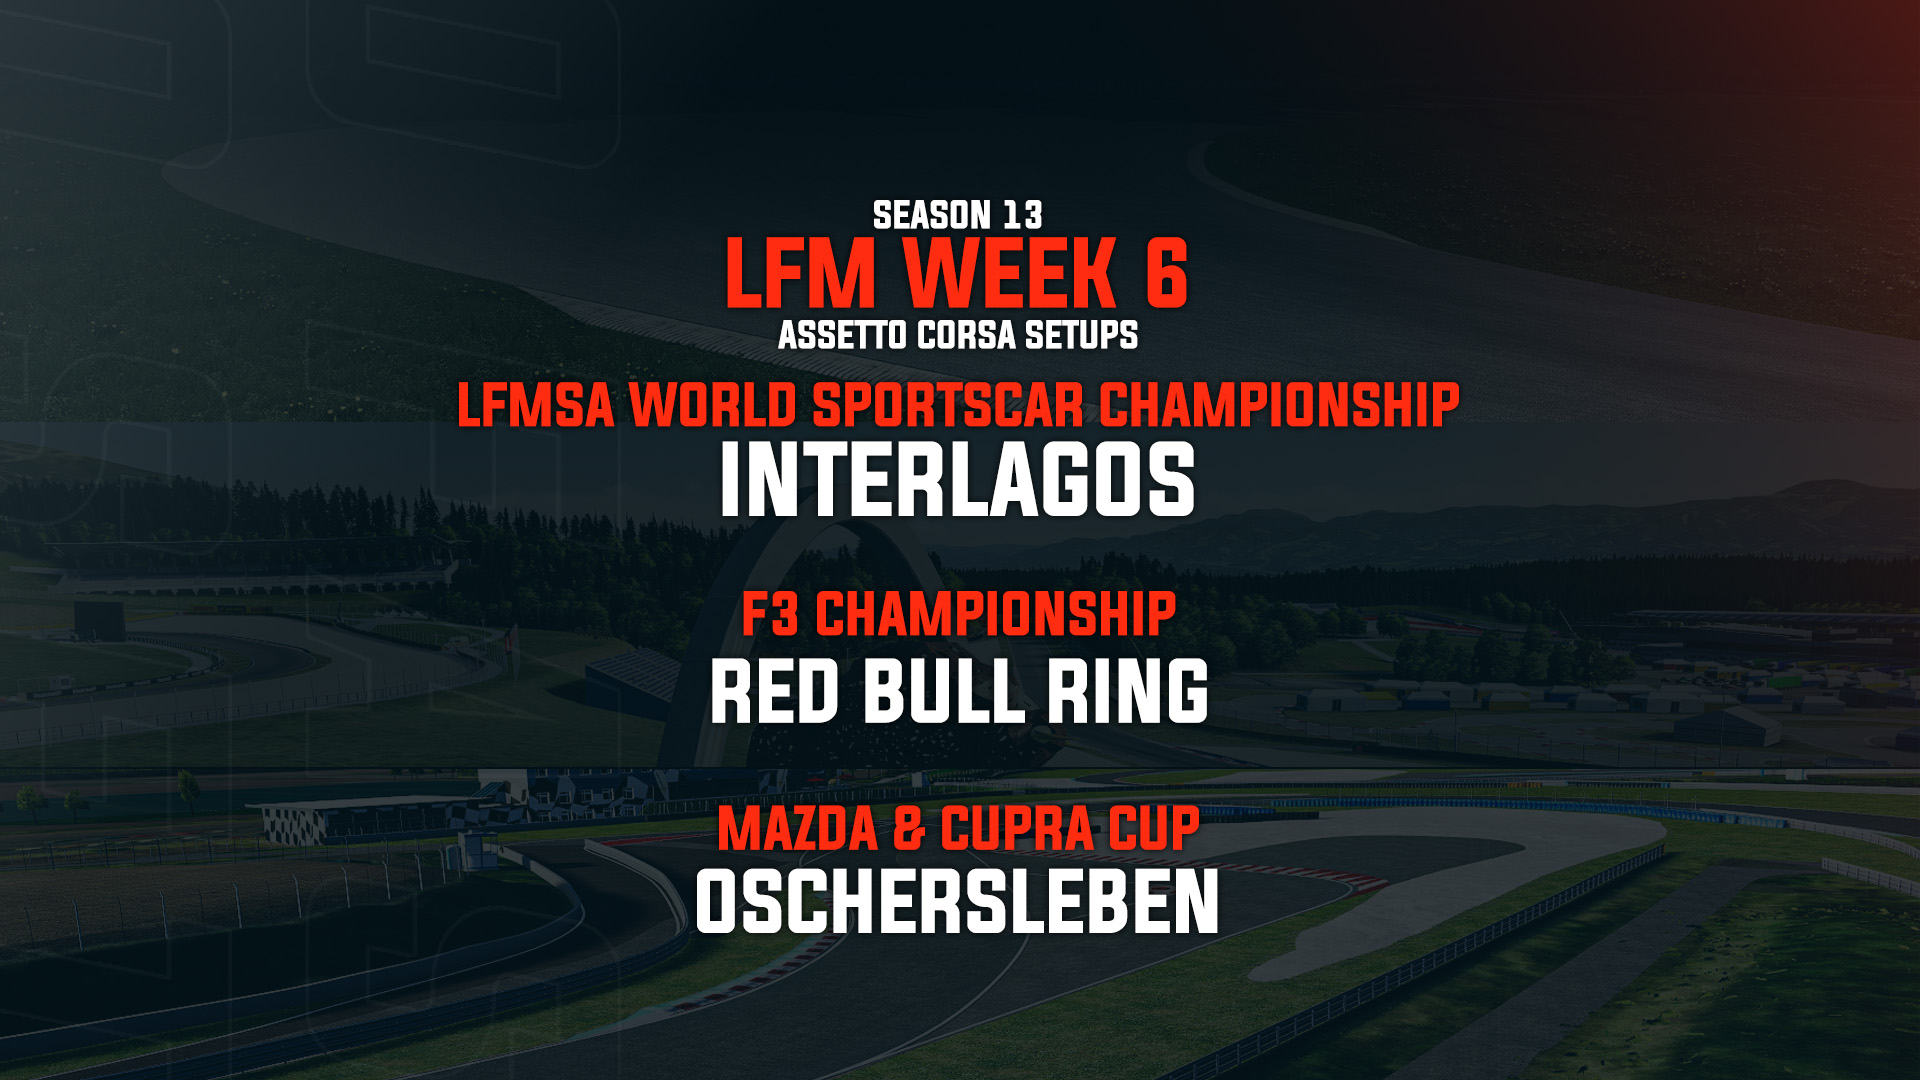 Week 6 infographic of lfm series tracks and series